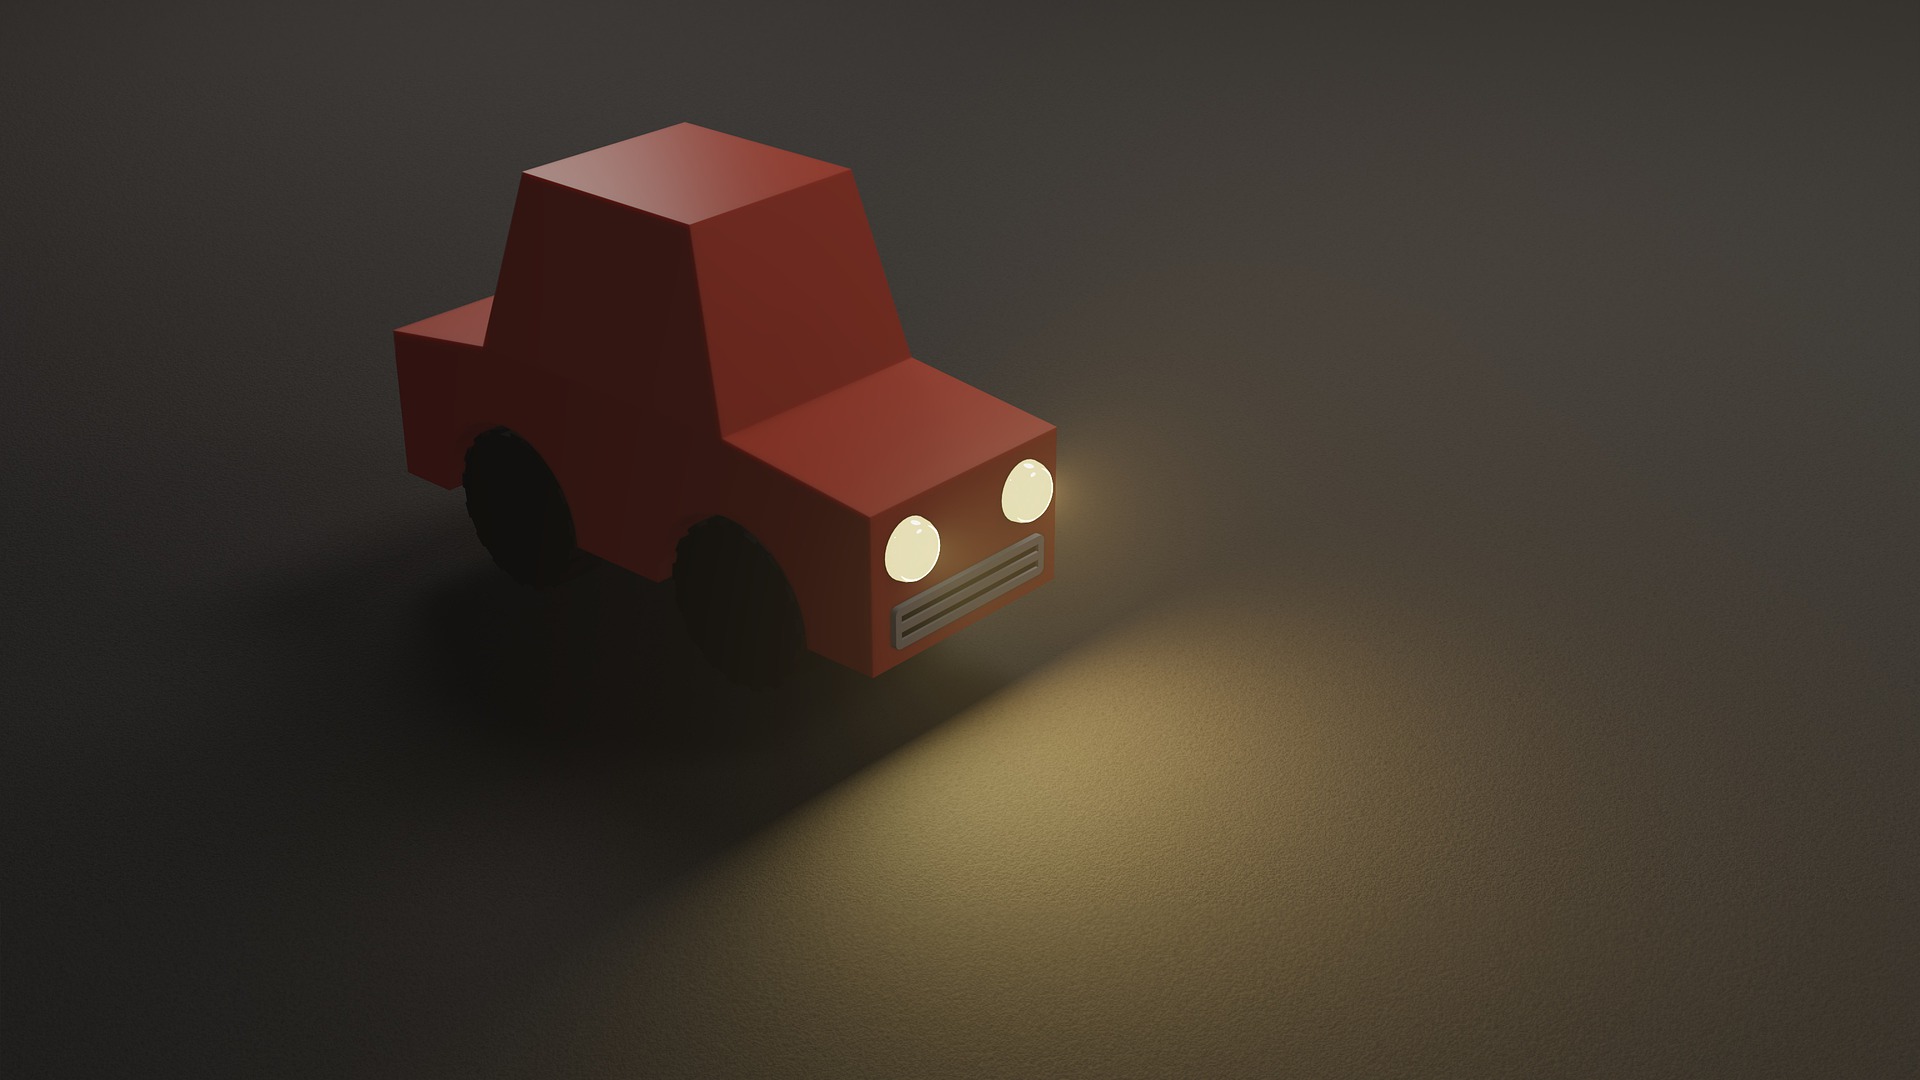 a 3d low poly car with headlights on in the night